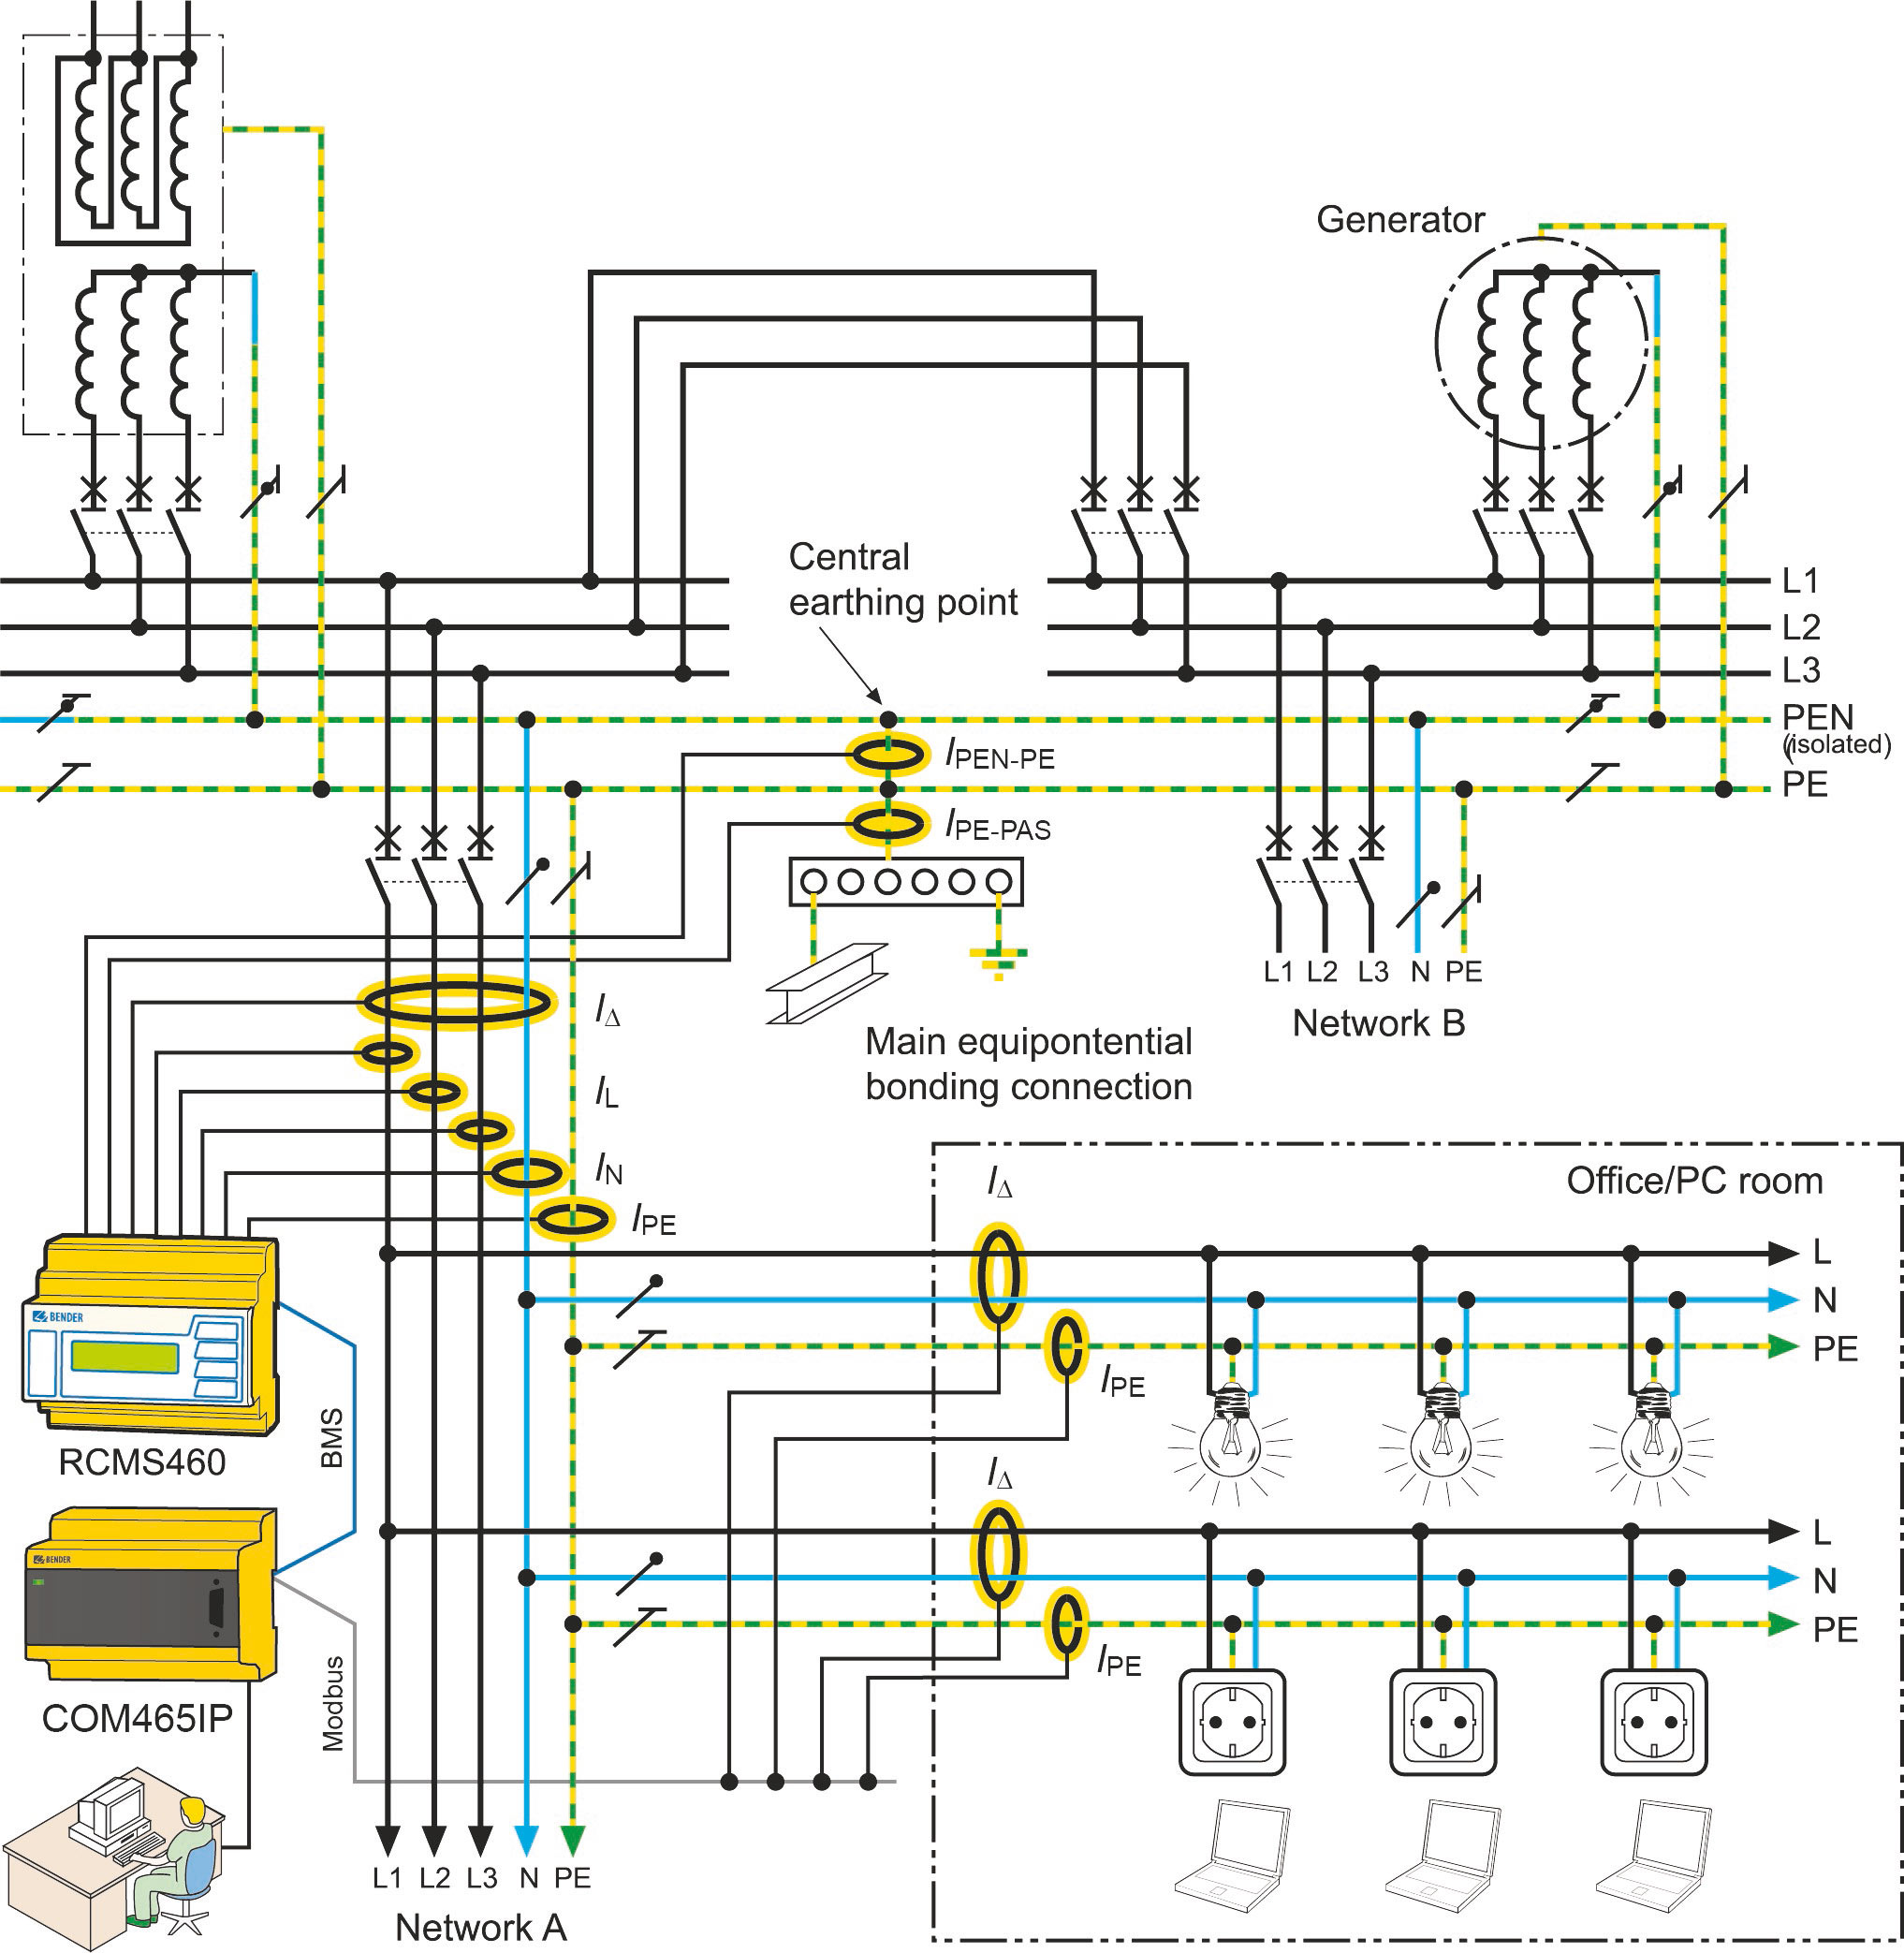 Schematic diagram of power supply monitoring